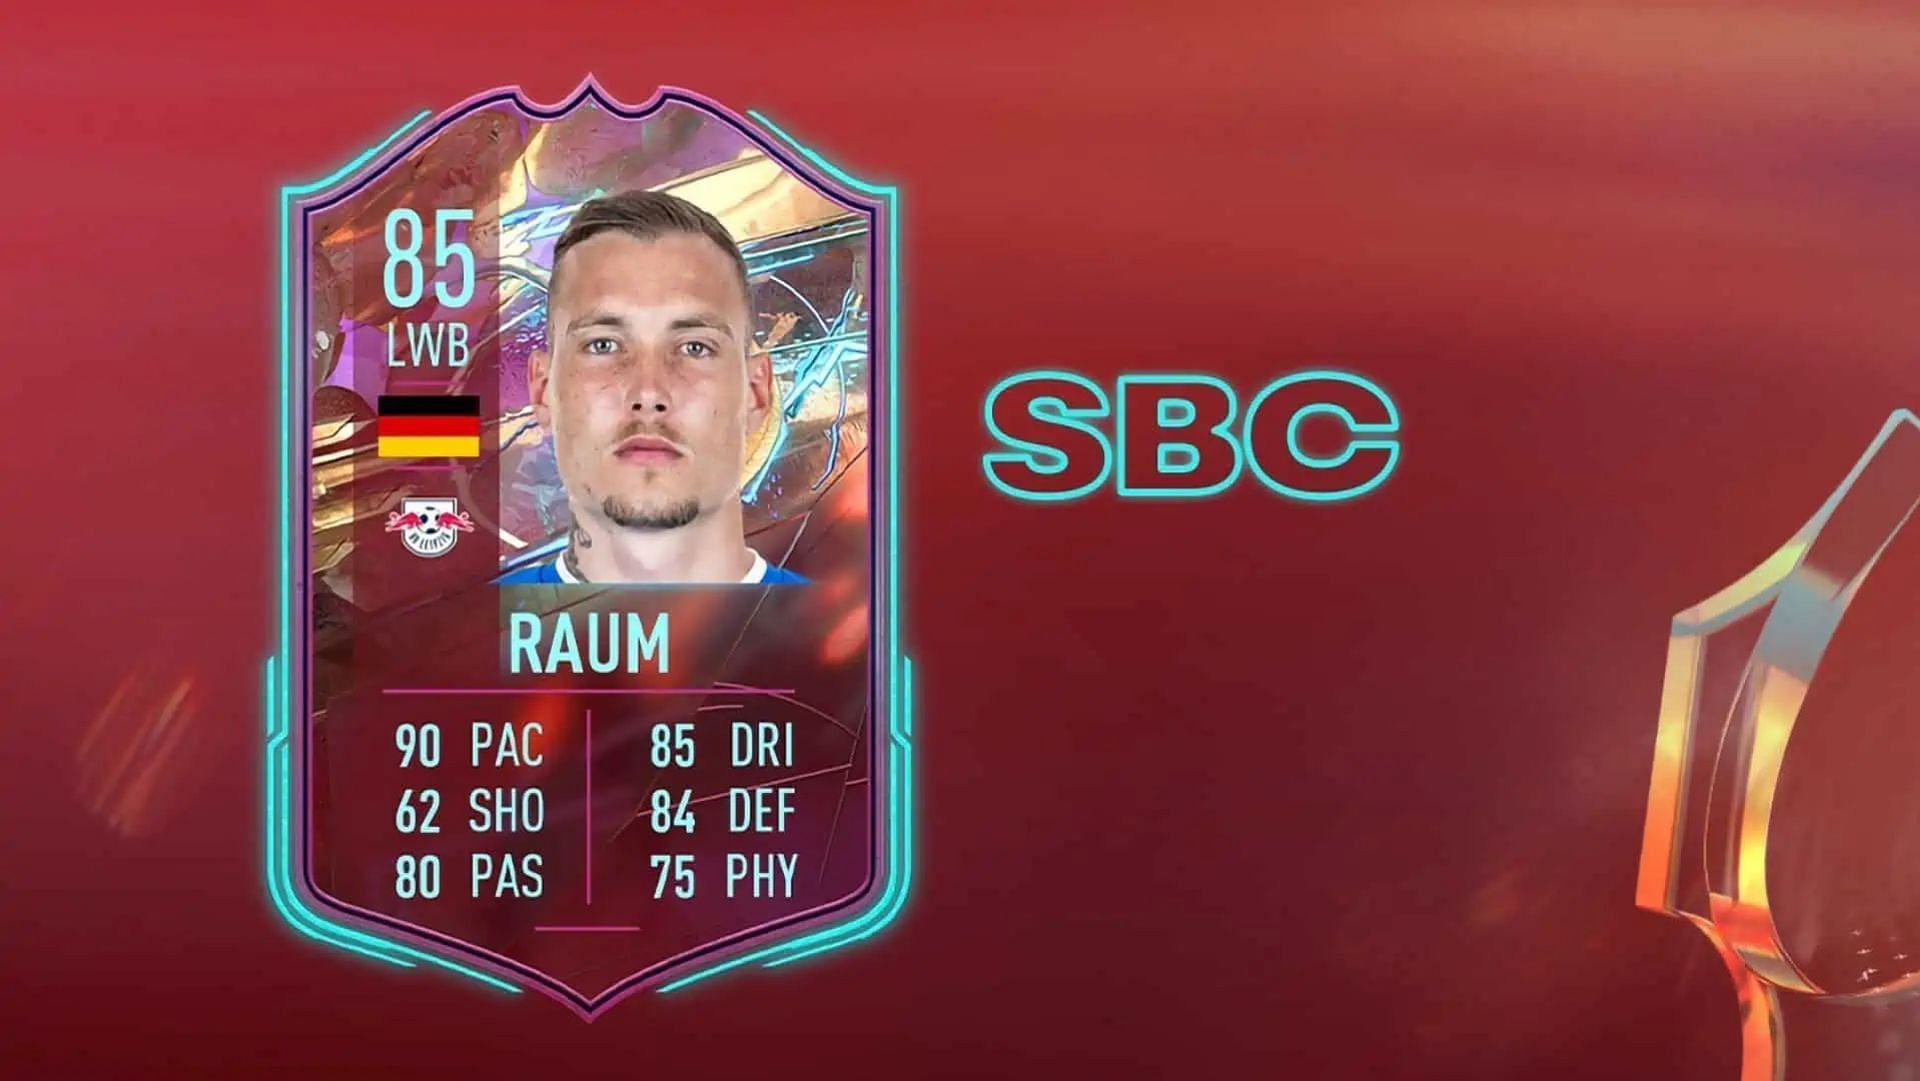 A new Rulebreakers card has been added as a SBC (Image via EA Sports)